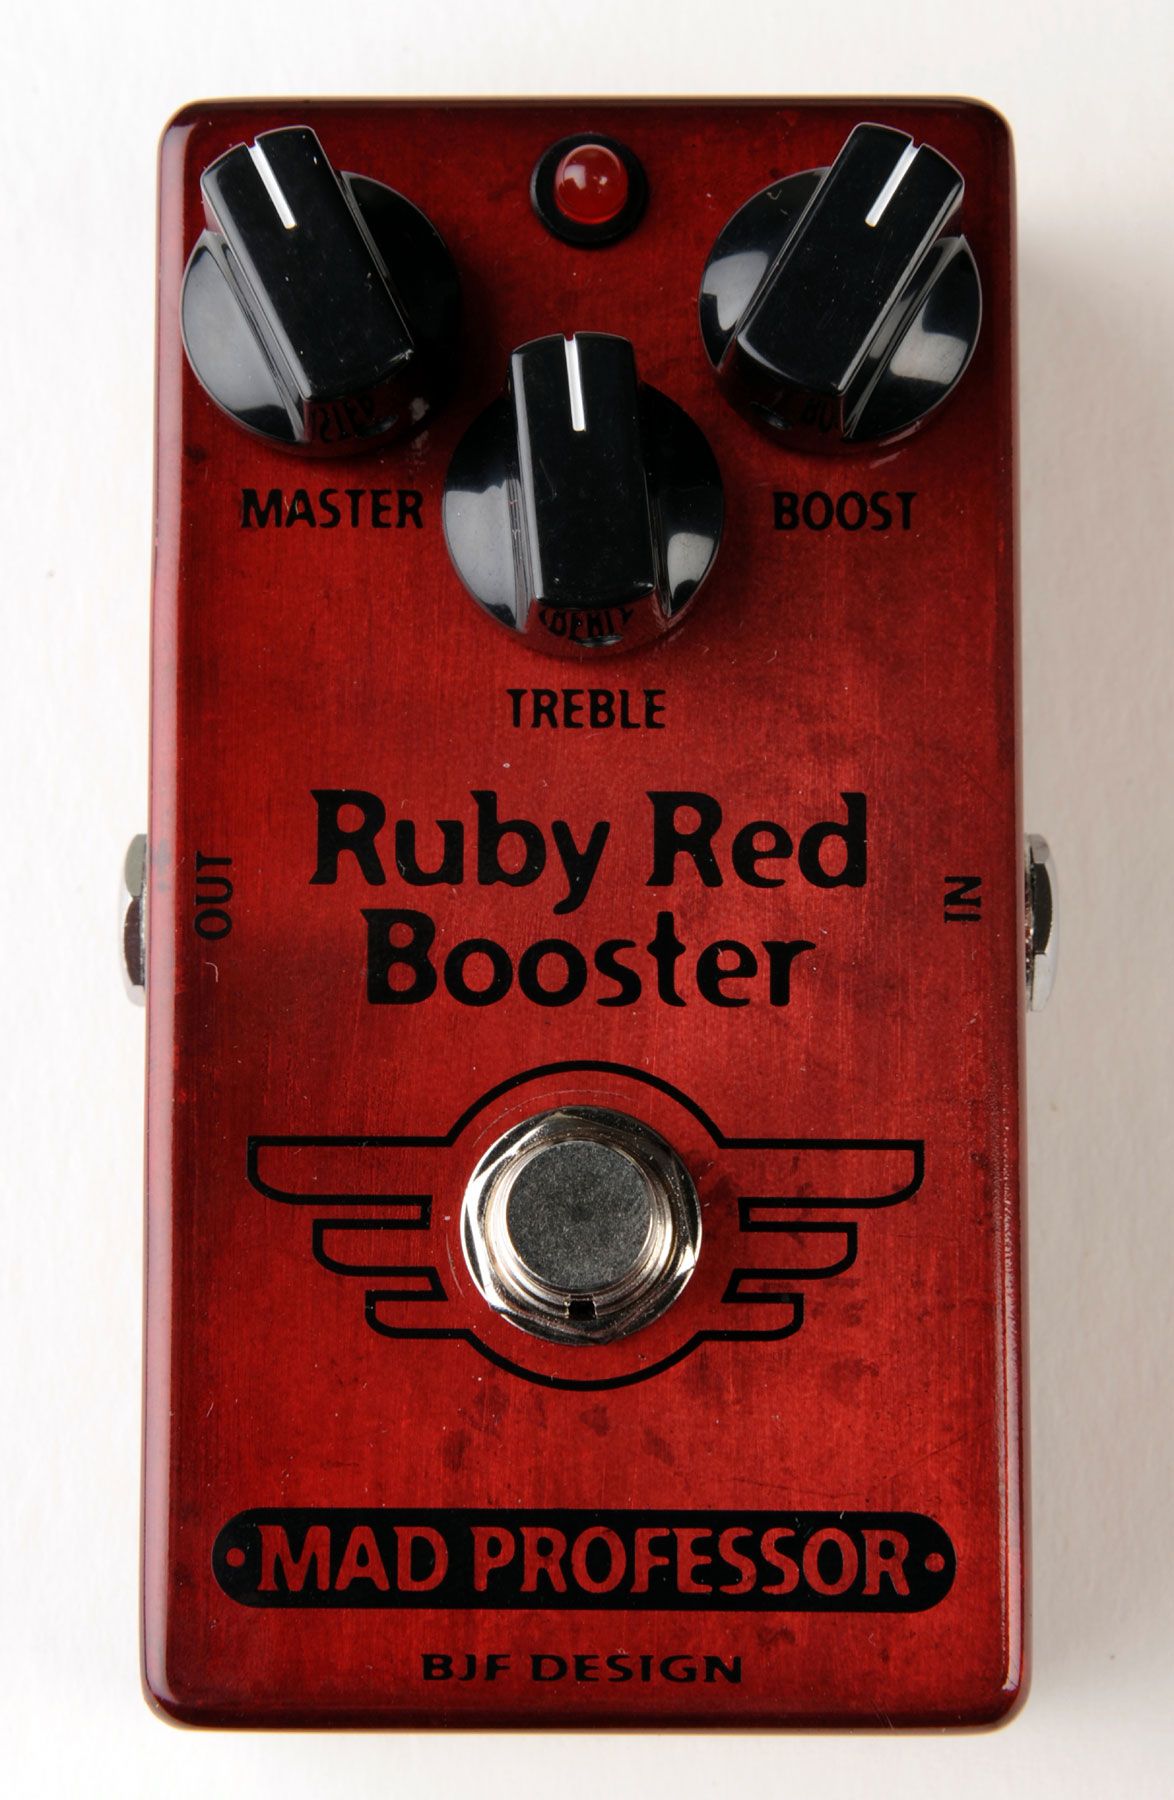 Ruby Red Booster FACパネル画像